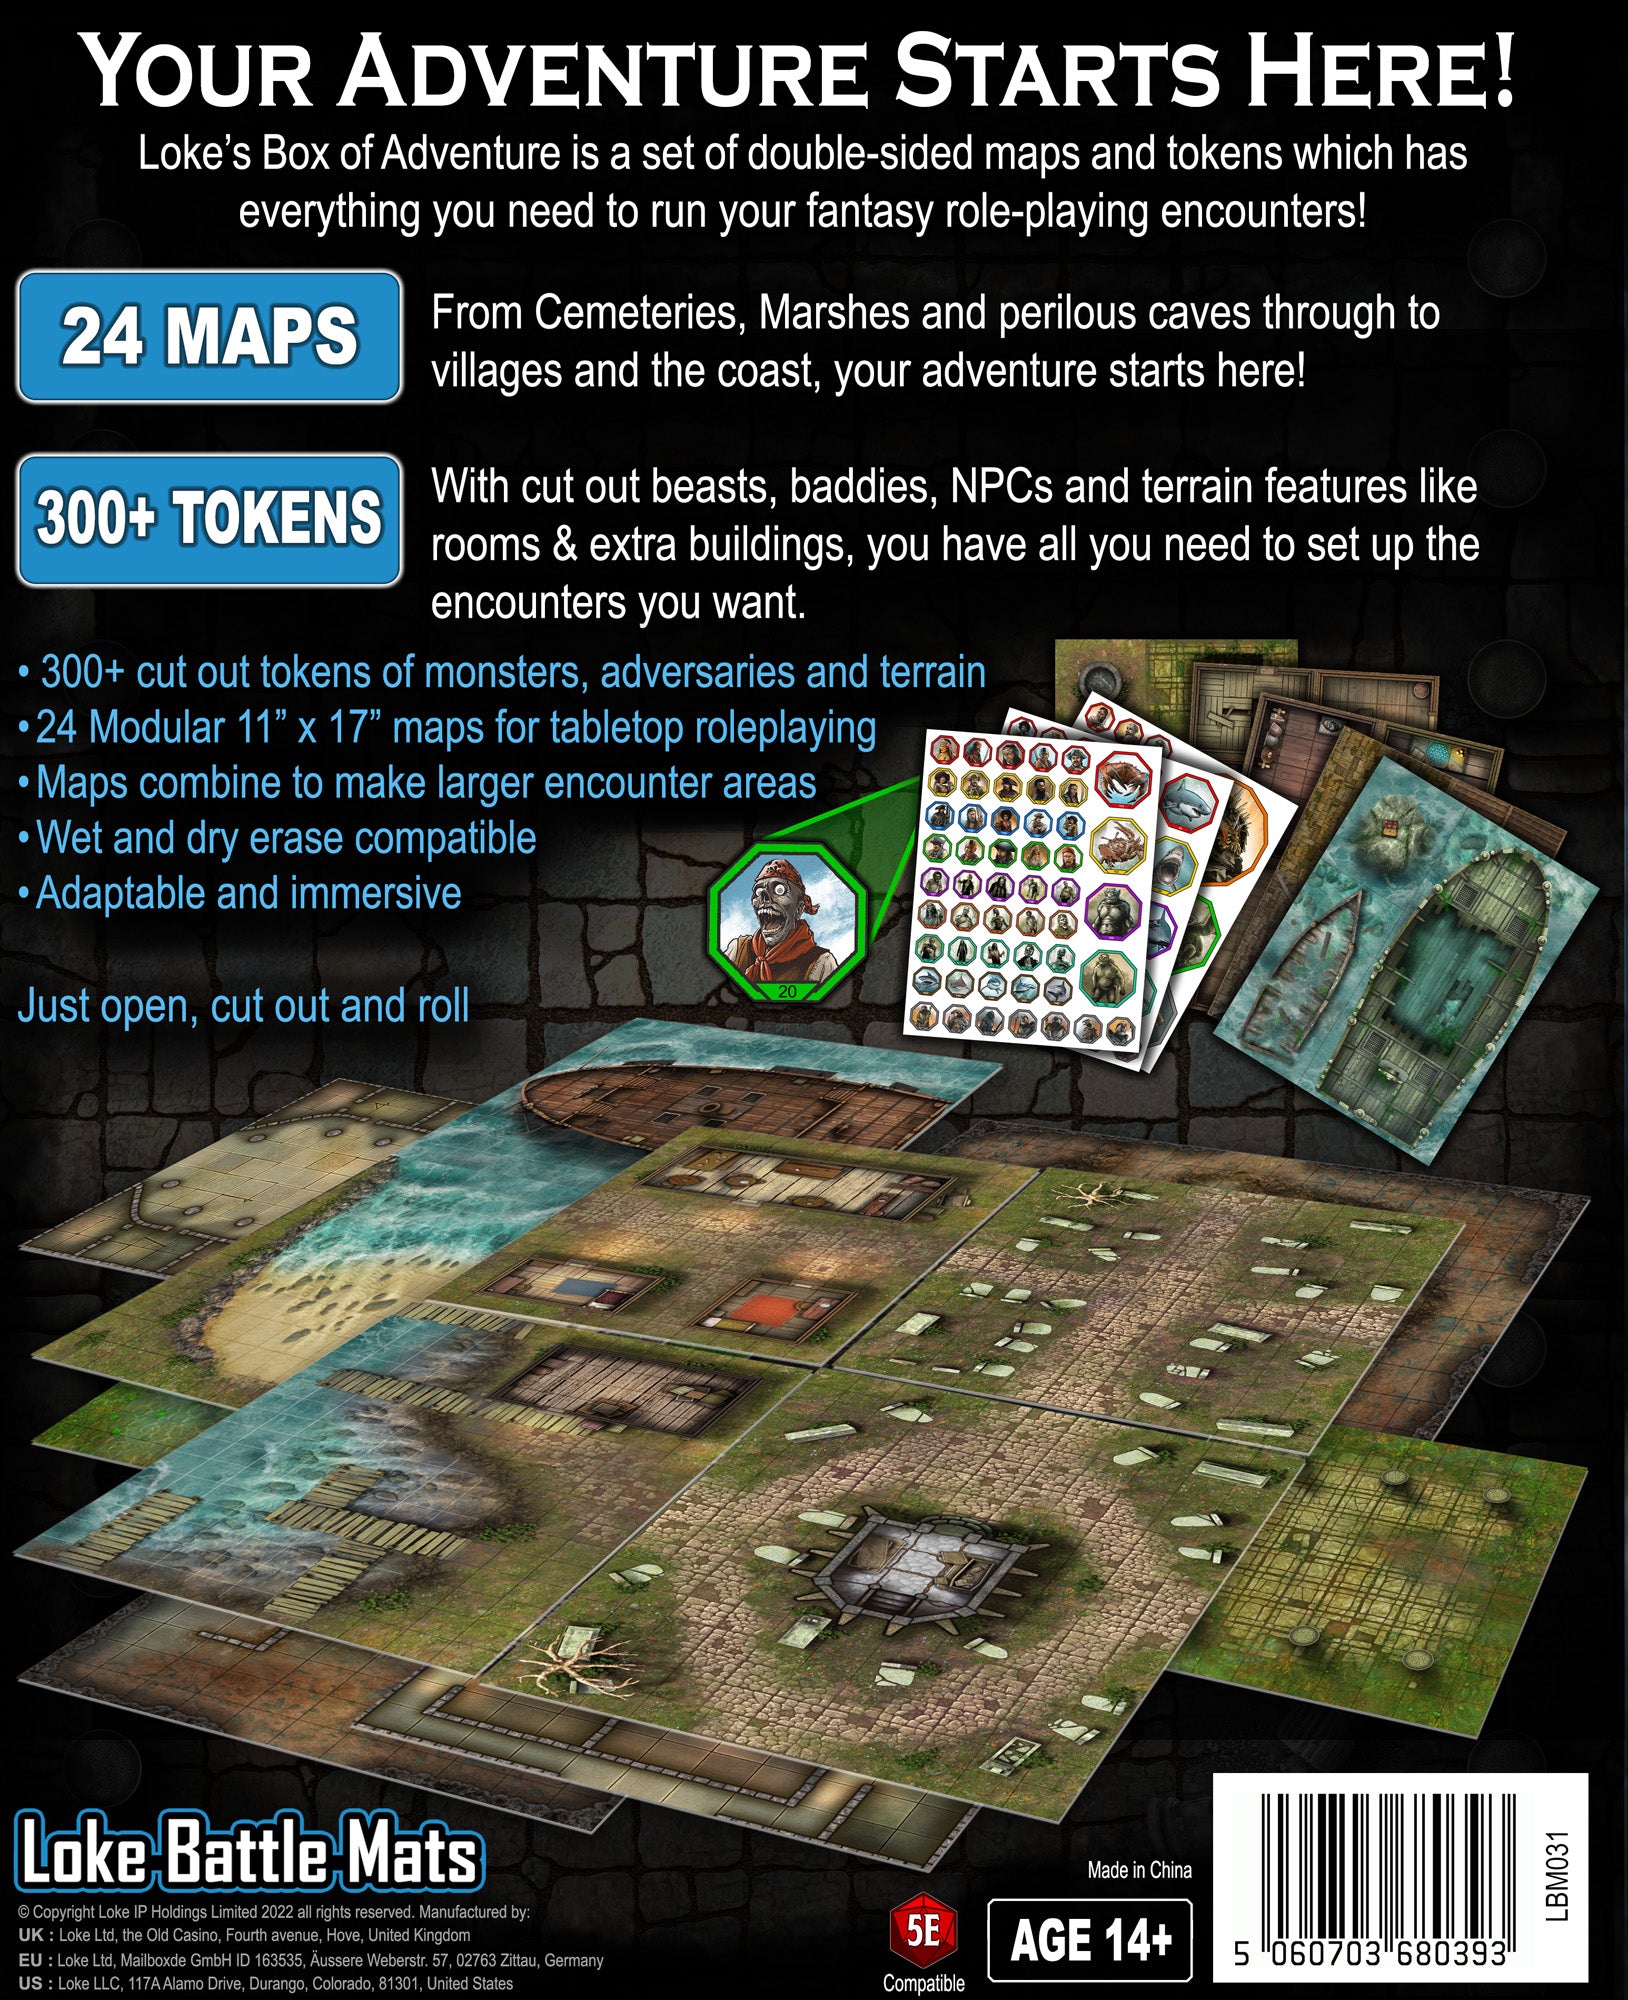 The Wilderness Books of Battle Mats is the perfect map set for your wild  Adventures! - BoLS GameWire